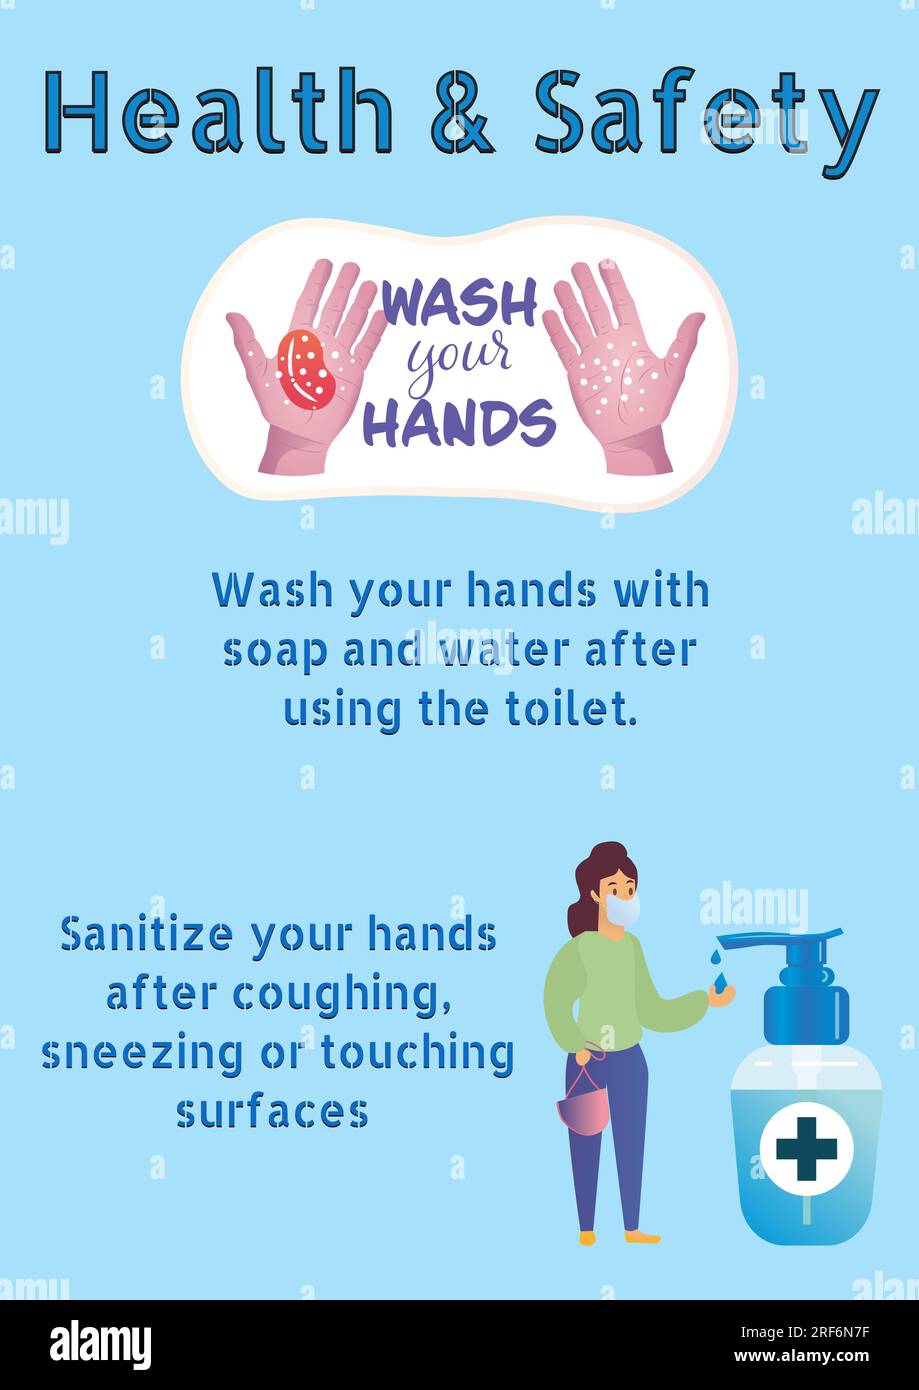 Composition of health and safety text over hand washing on blue background Stock Photo